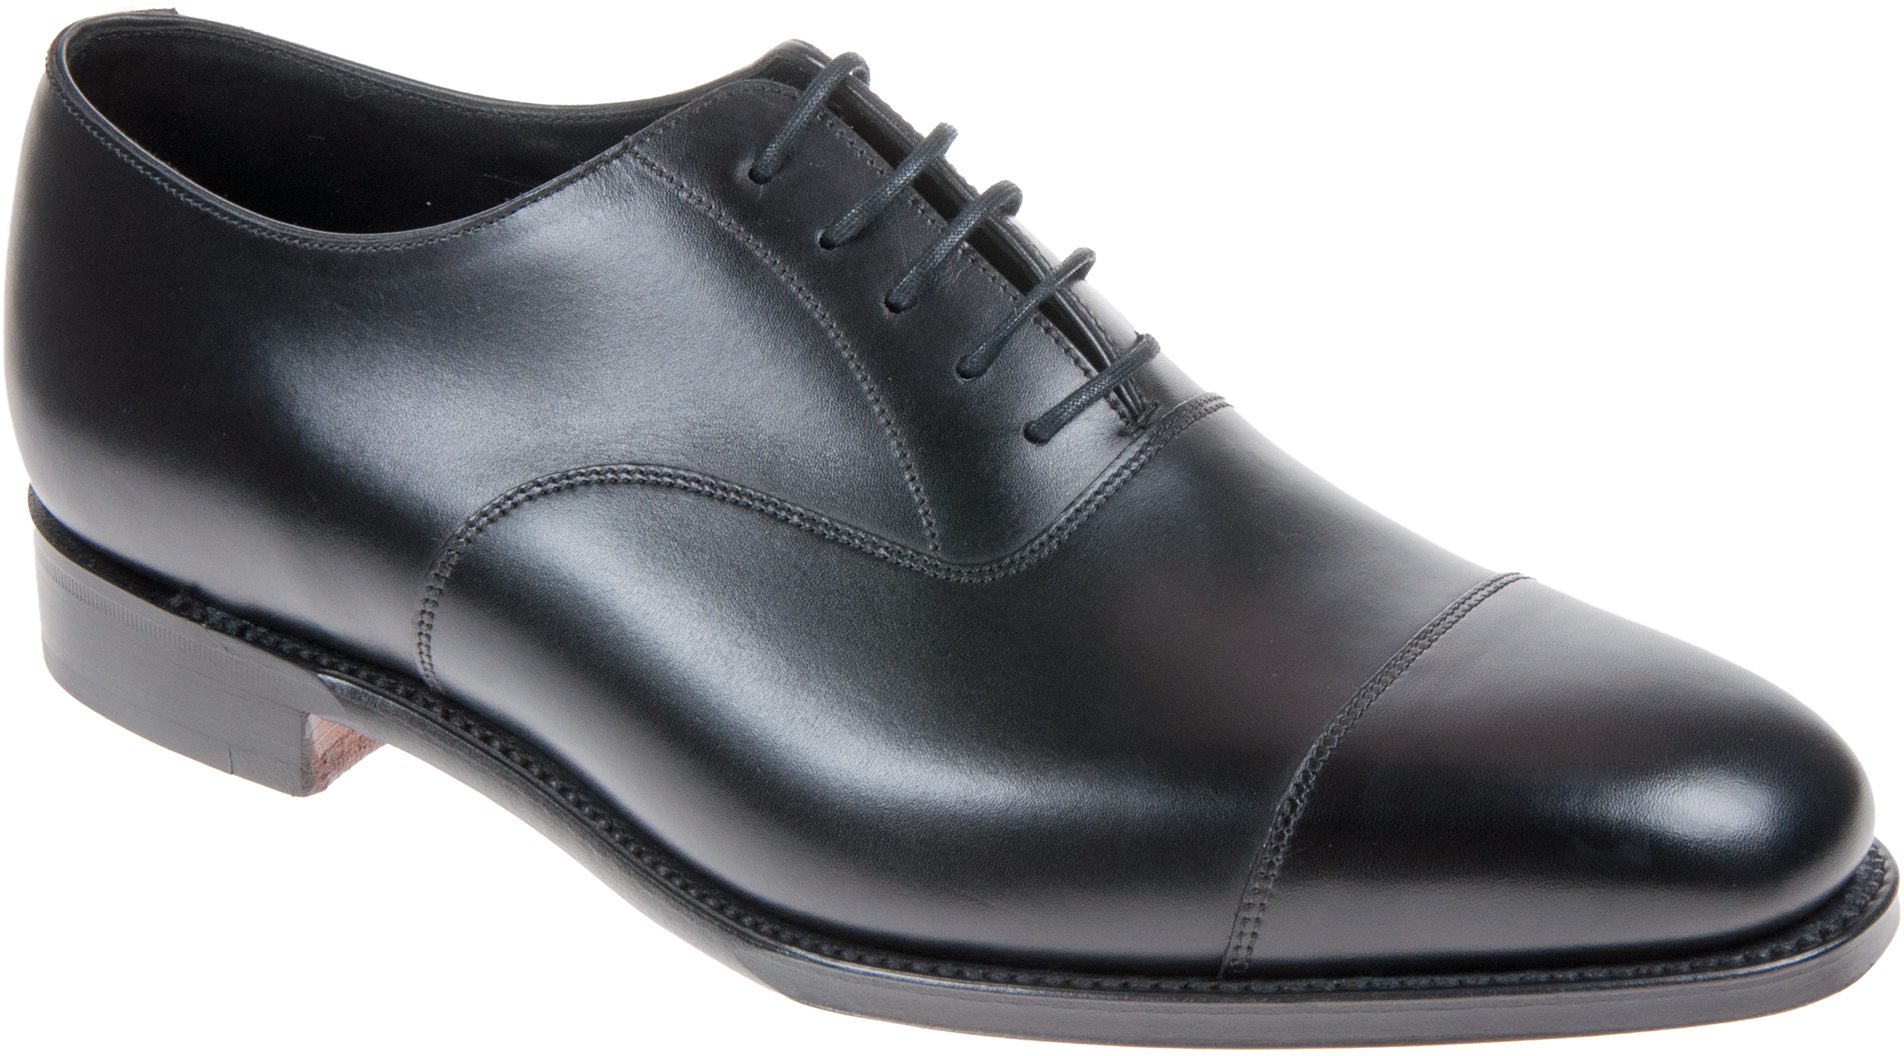 Loake Aldwych Black Calf Leather - Formal Shoes - Humphries Shoes